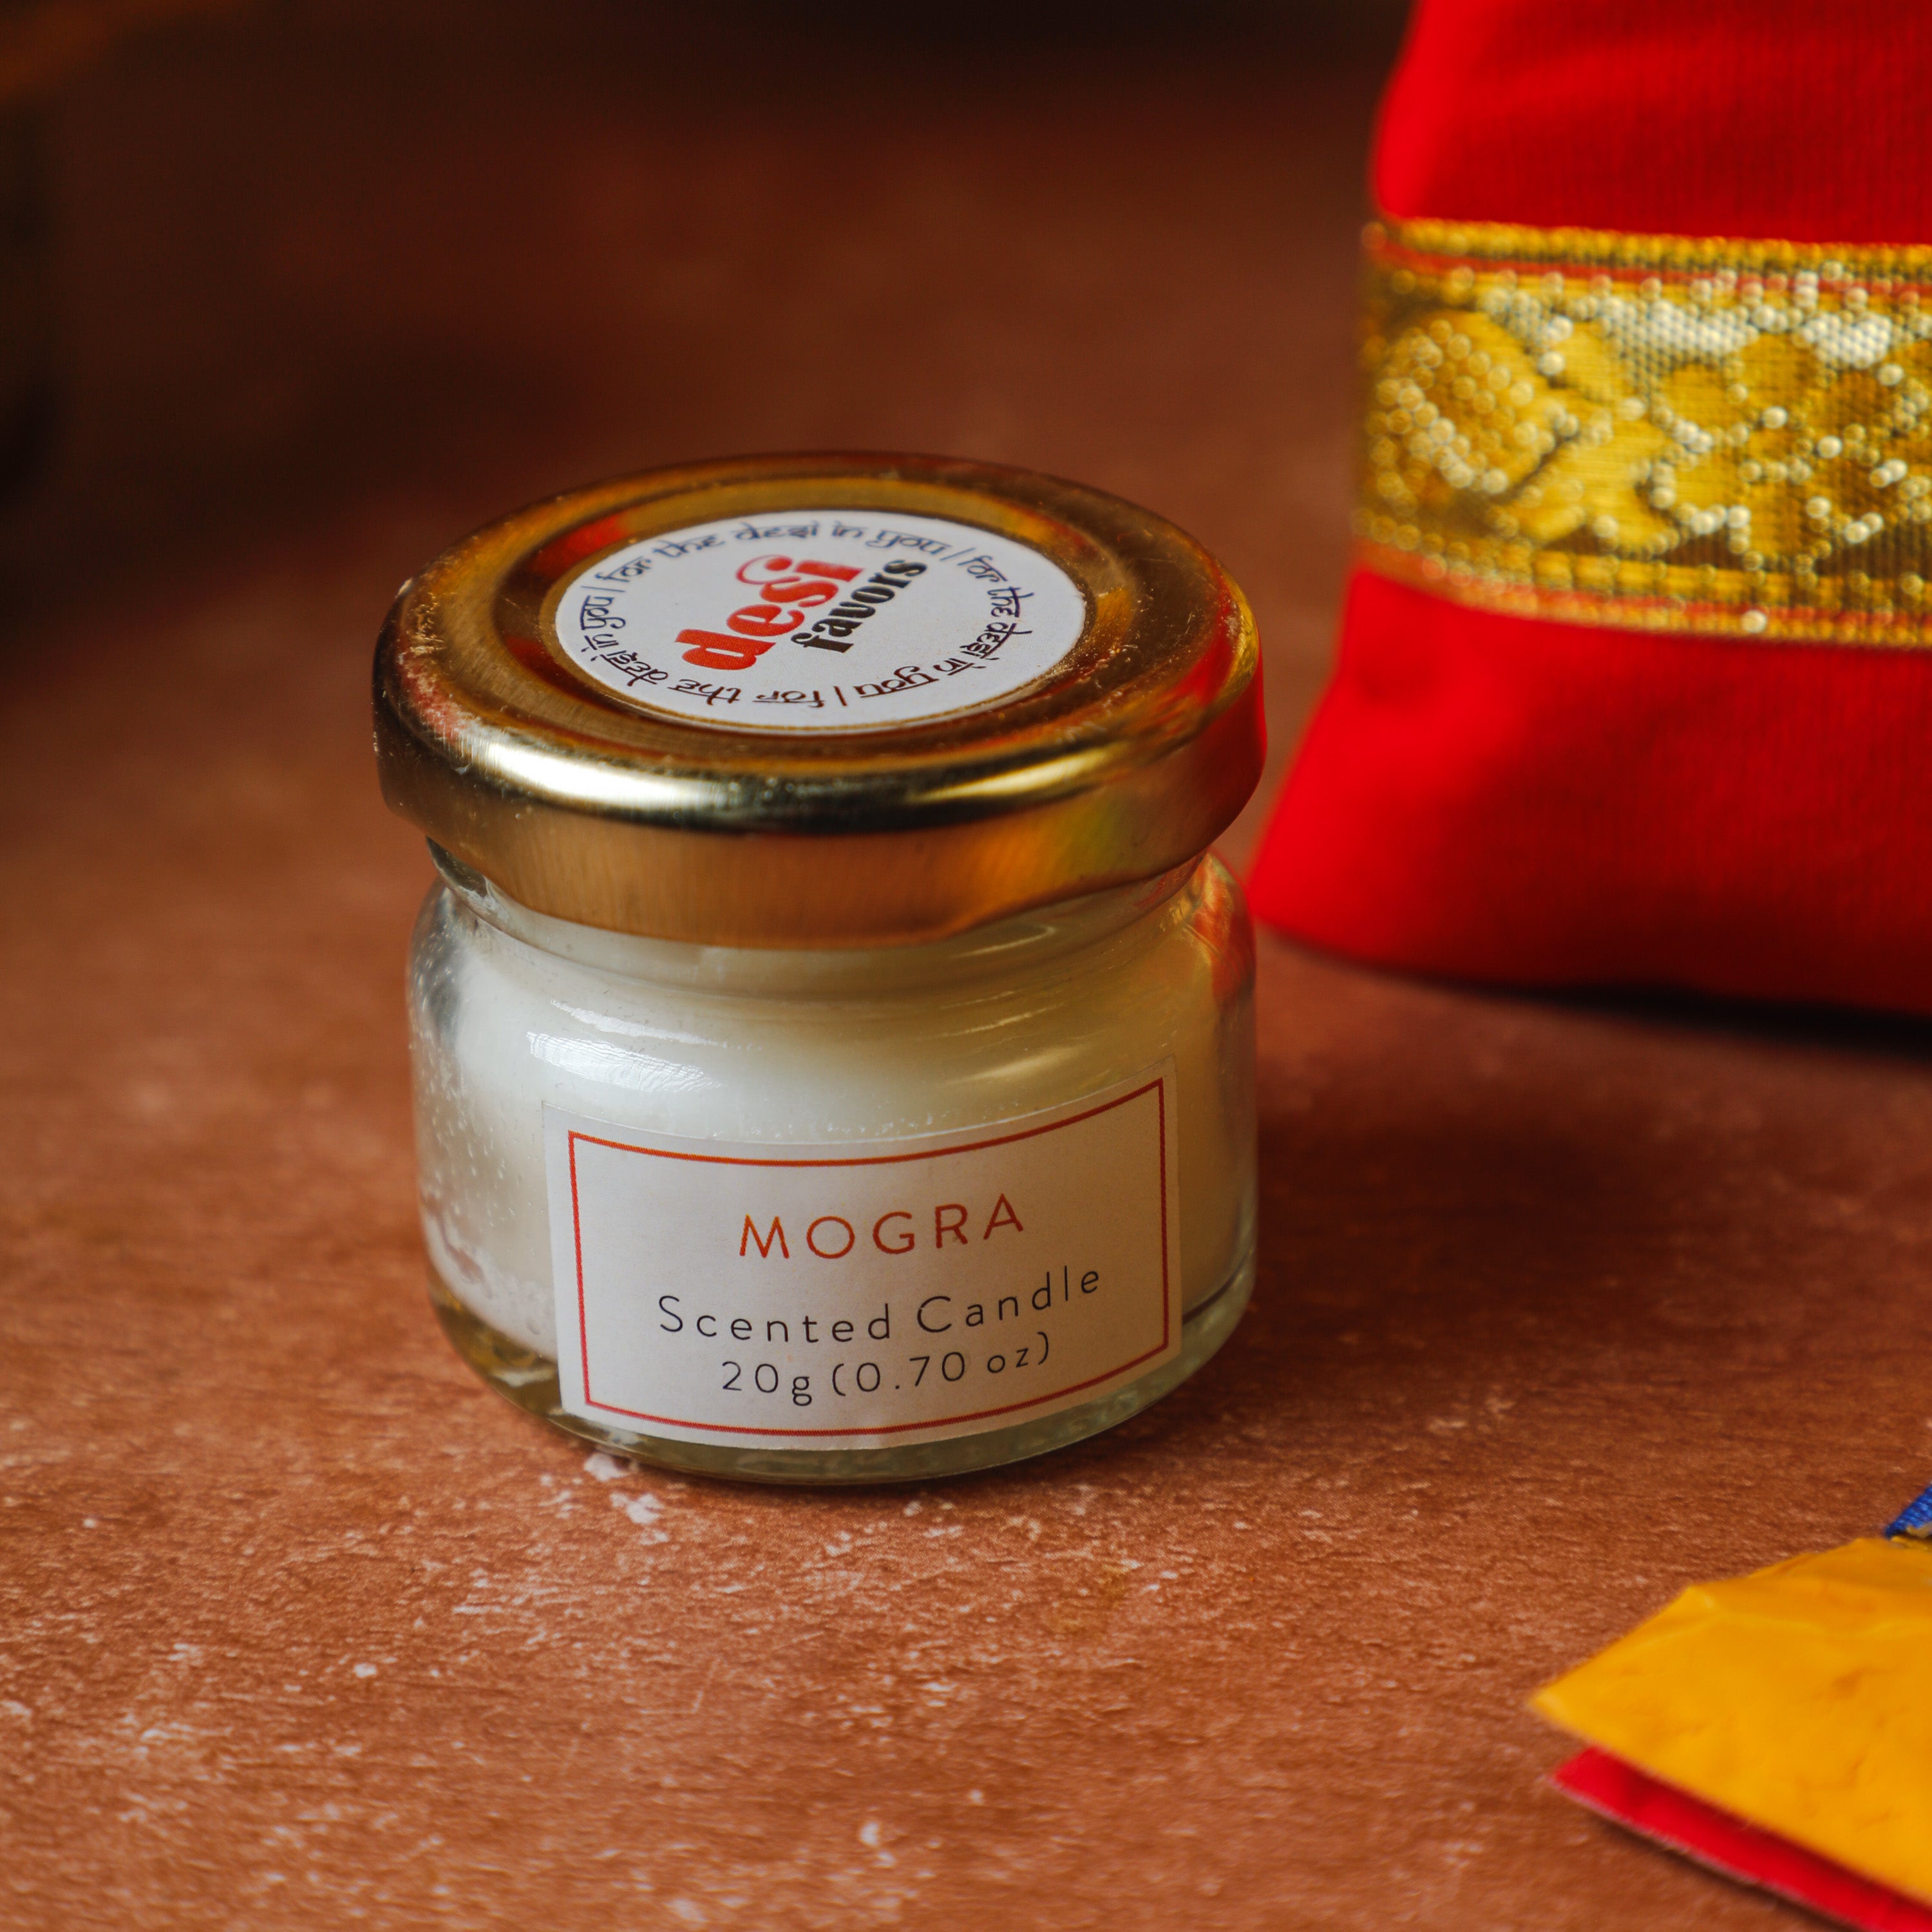 Aromatic Mogra Scented Votive Candles packed in a small glass jar